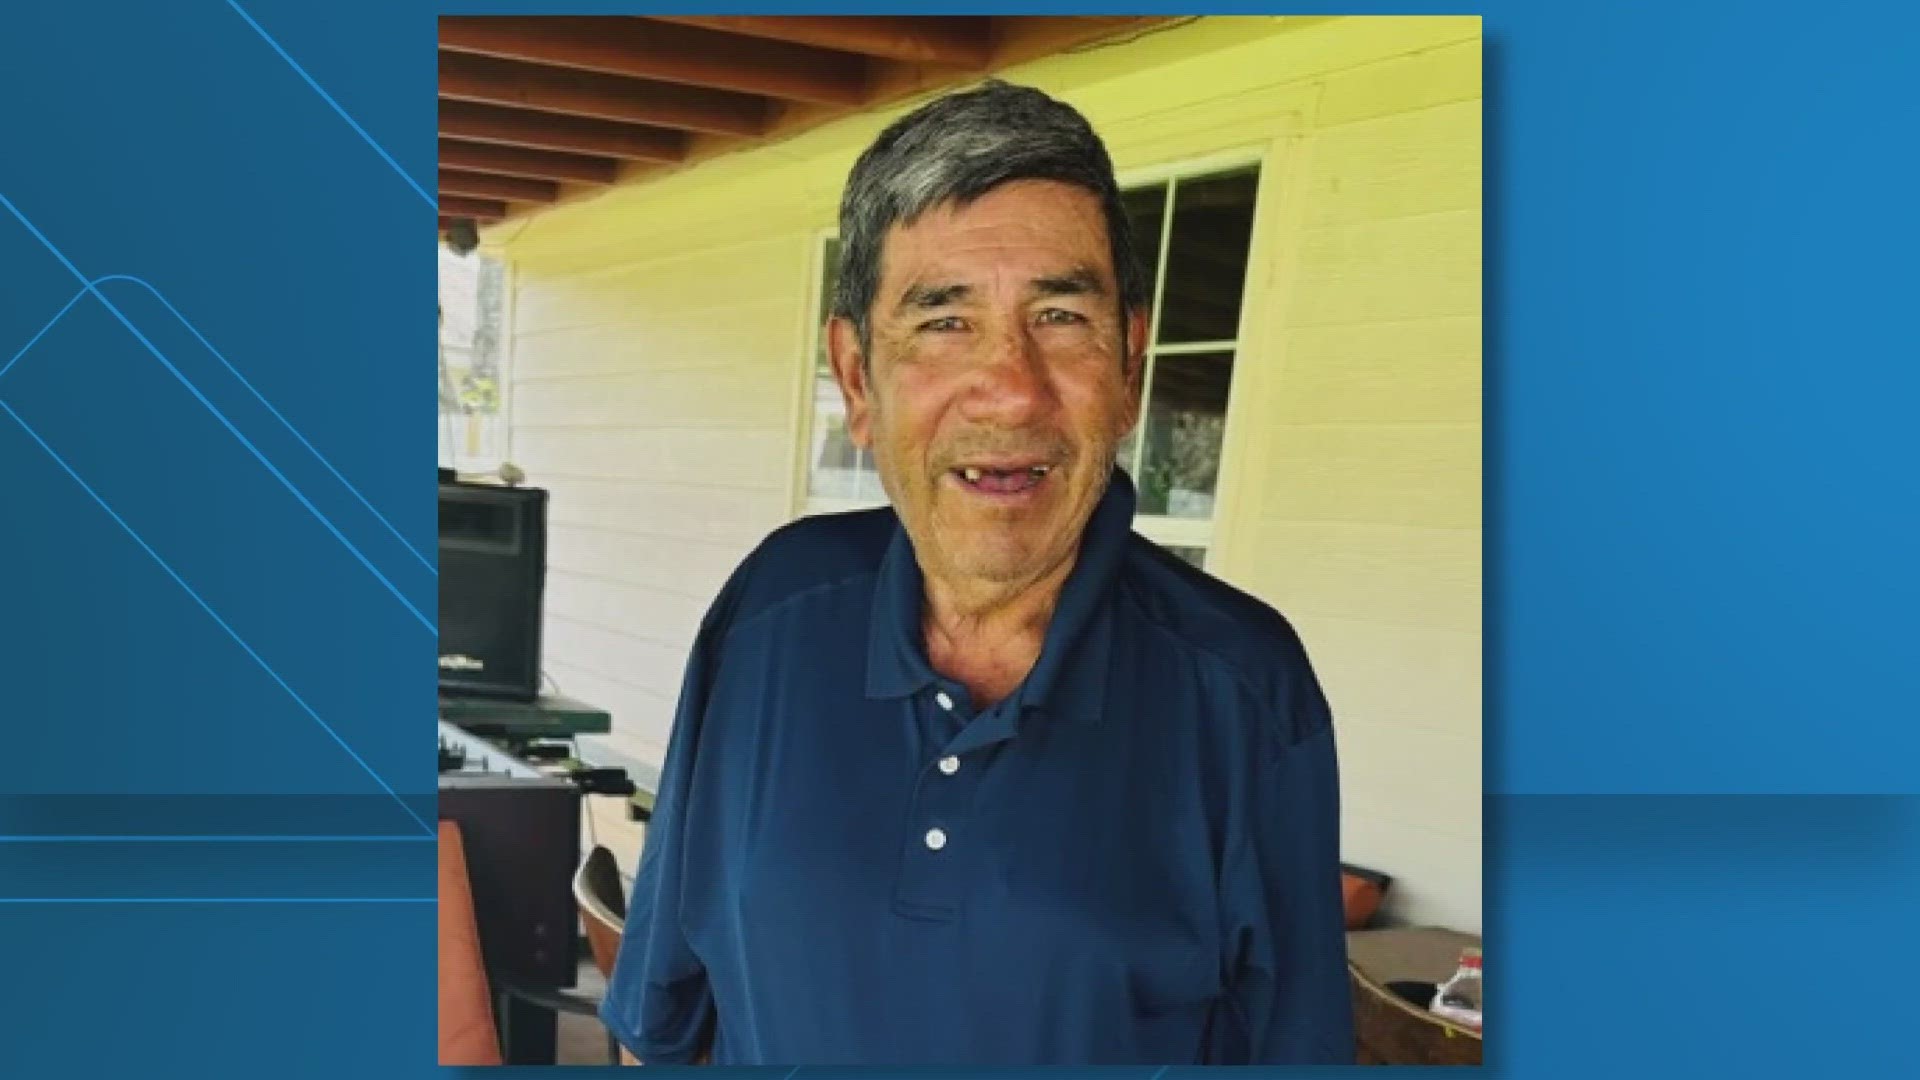 Rogelio Arias, 79, has been missing since Saturday, March 9, and was last seen on Muelhause Street in Belton.